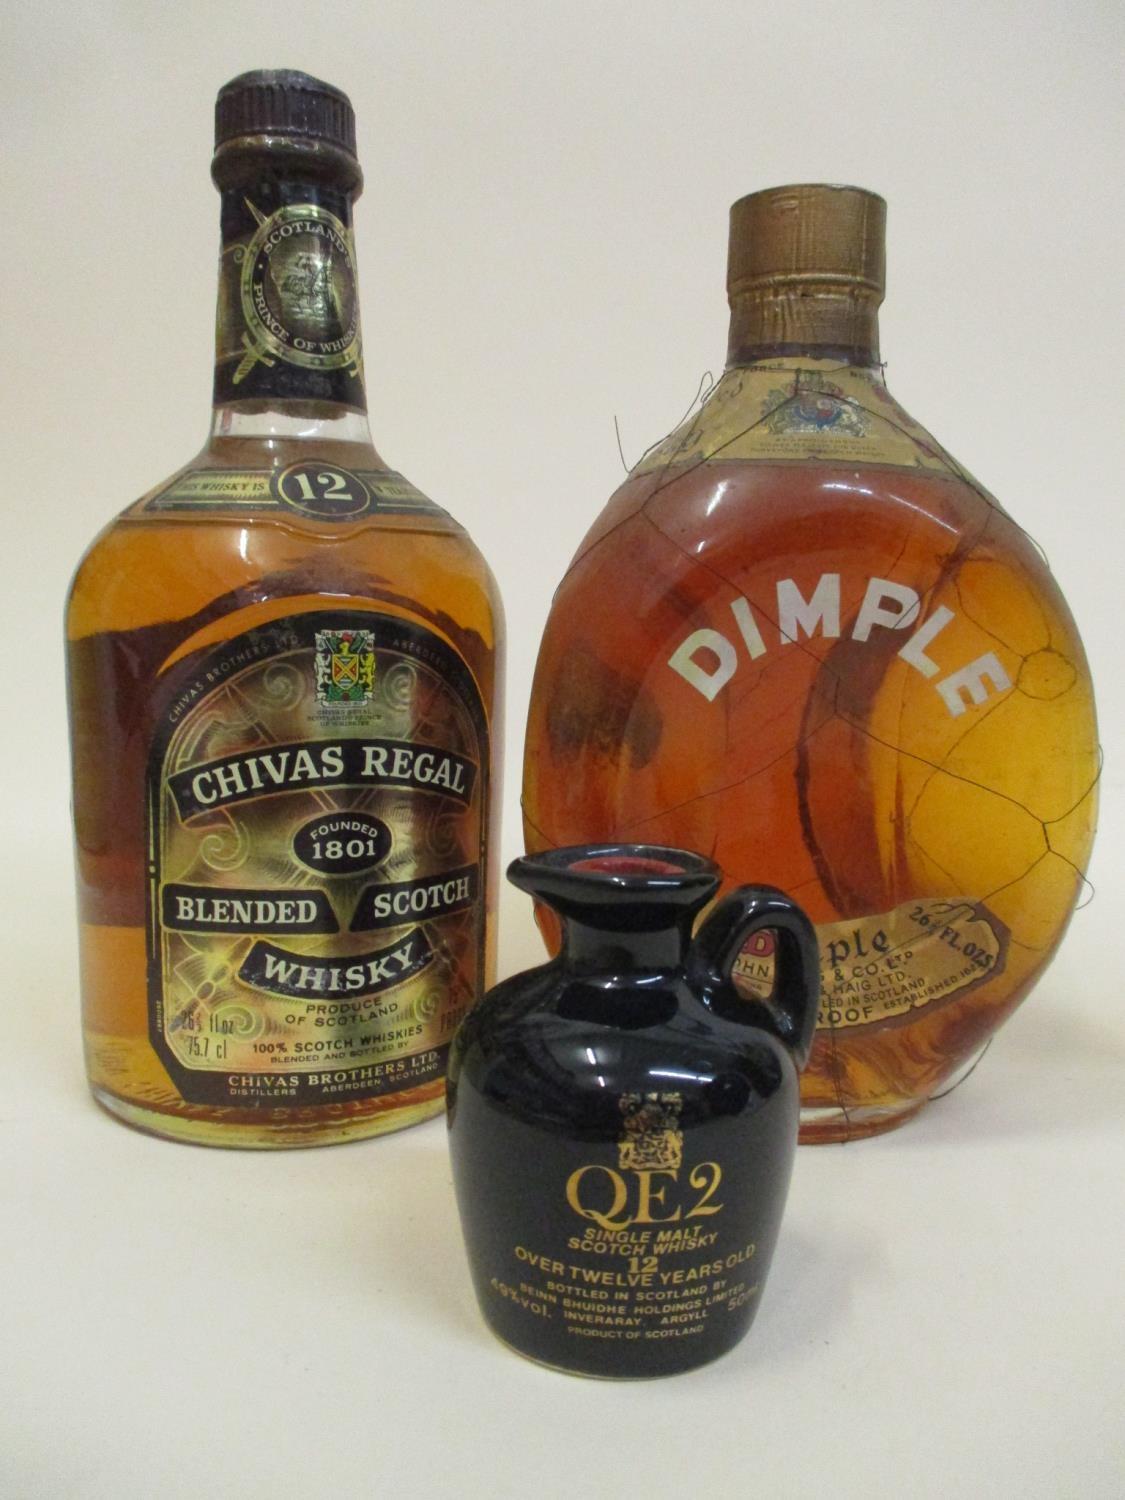 One bottle of Dimple Haig Whisky and one bottle of Chivas Regal blended Scotch Whisky along with a